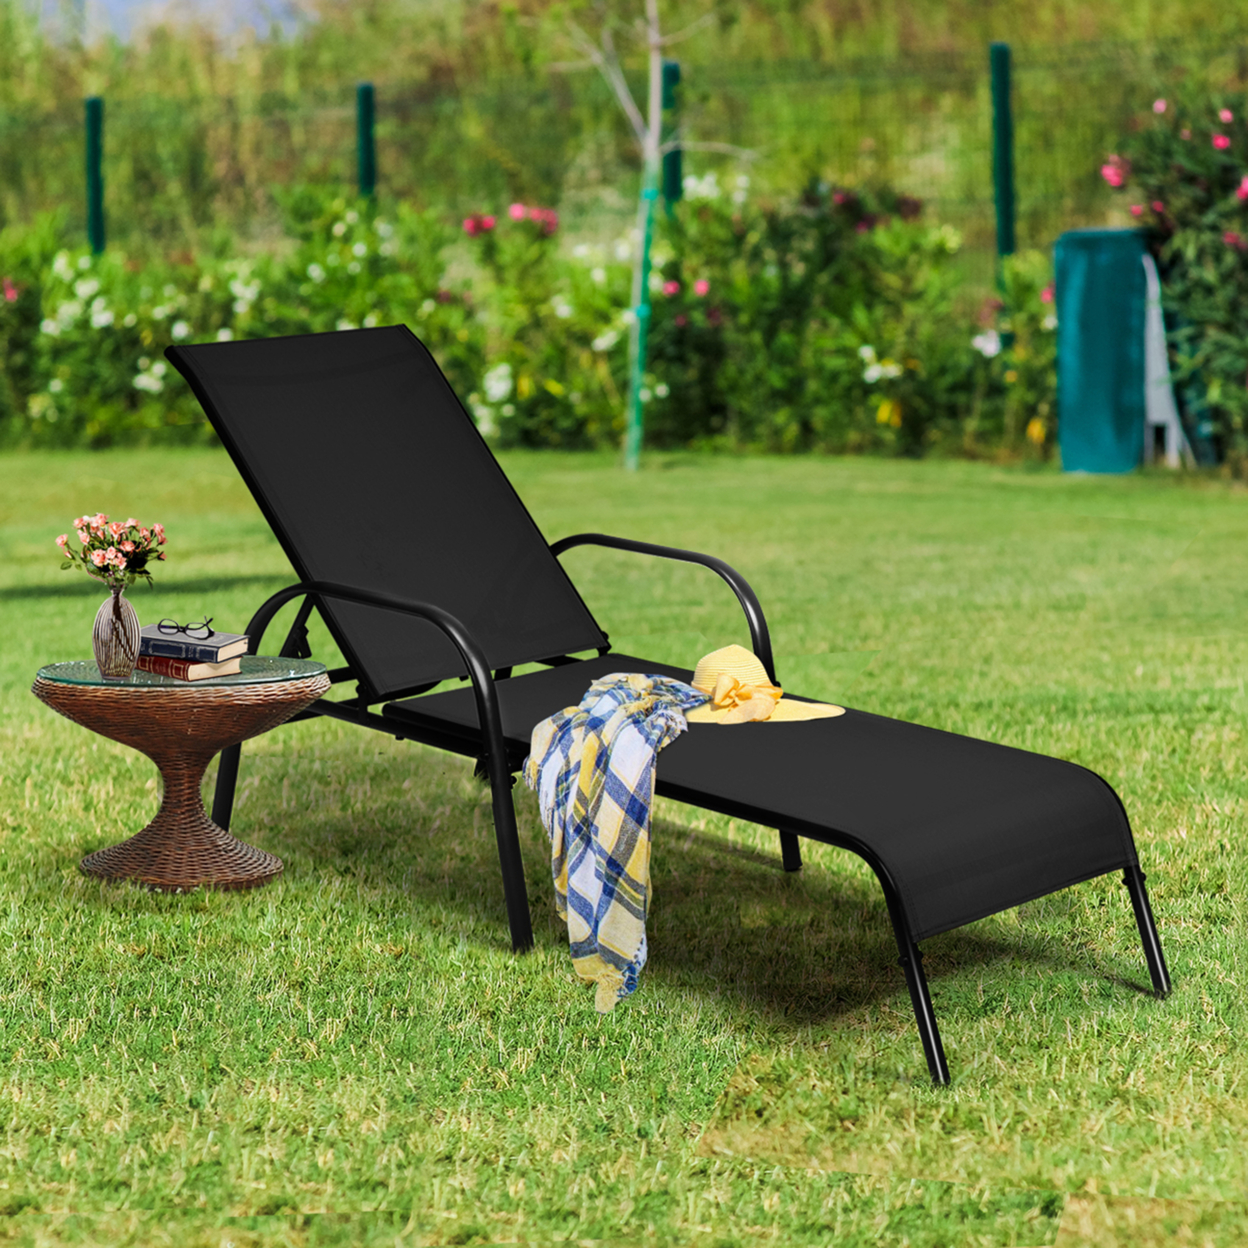 Adjustable Chaise Lounge Chair Recliner Patio Yard Outdoor W/ Armrest Black